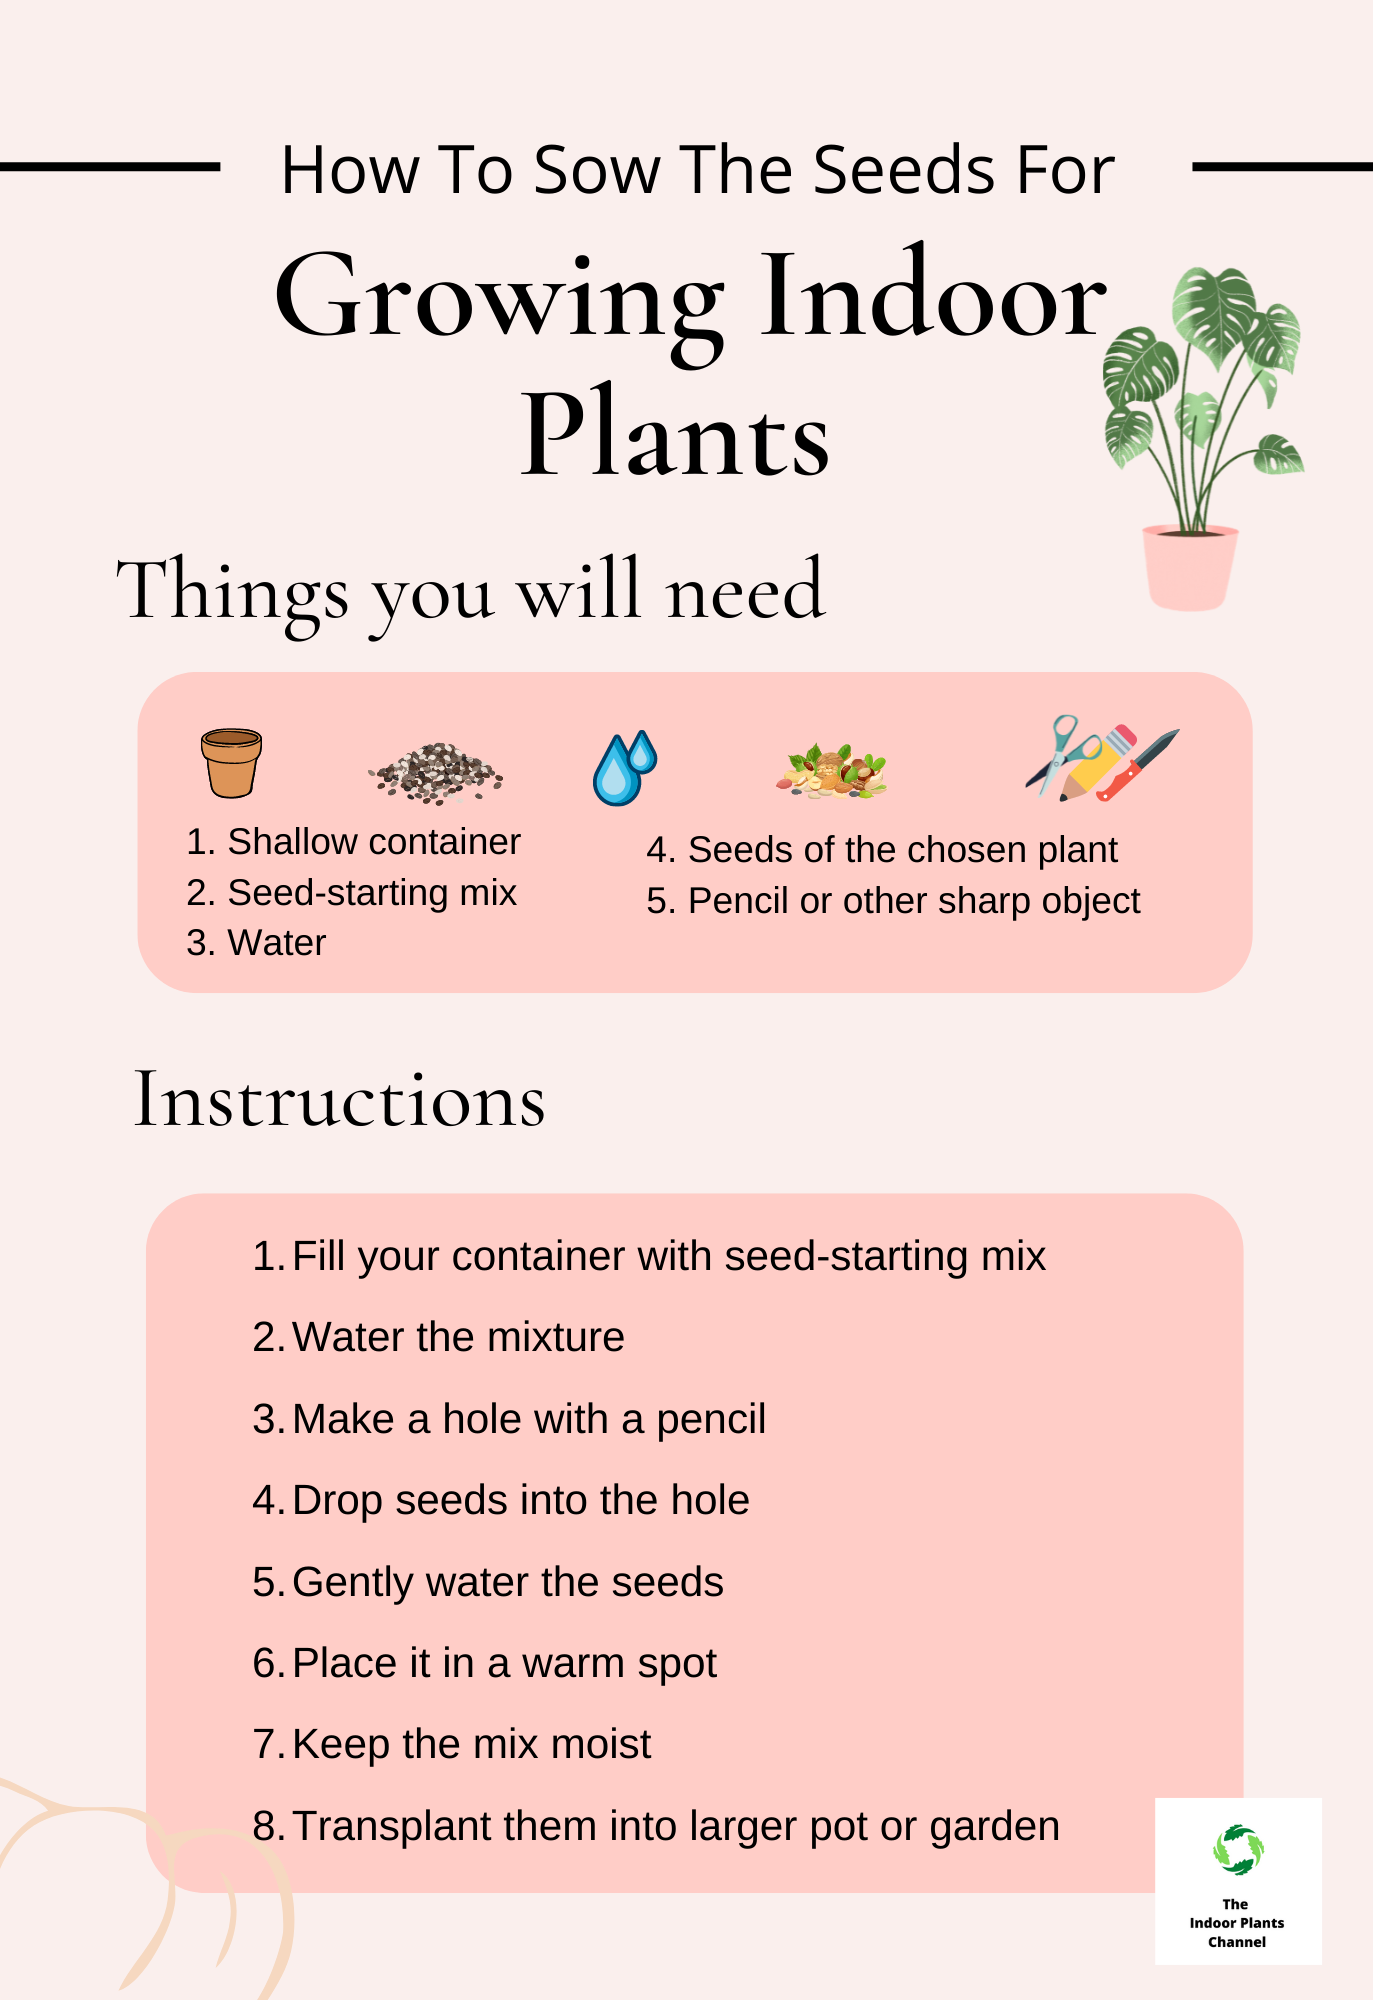 How To Sow The Seeds For Growing Indoor Plants